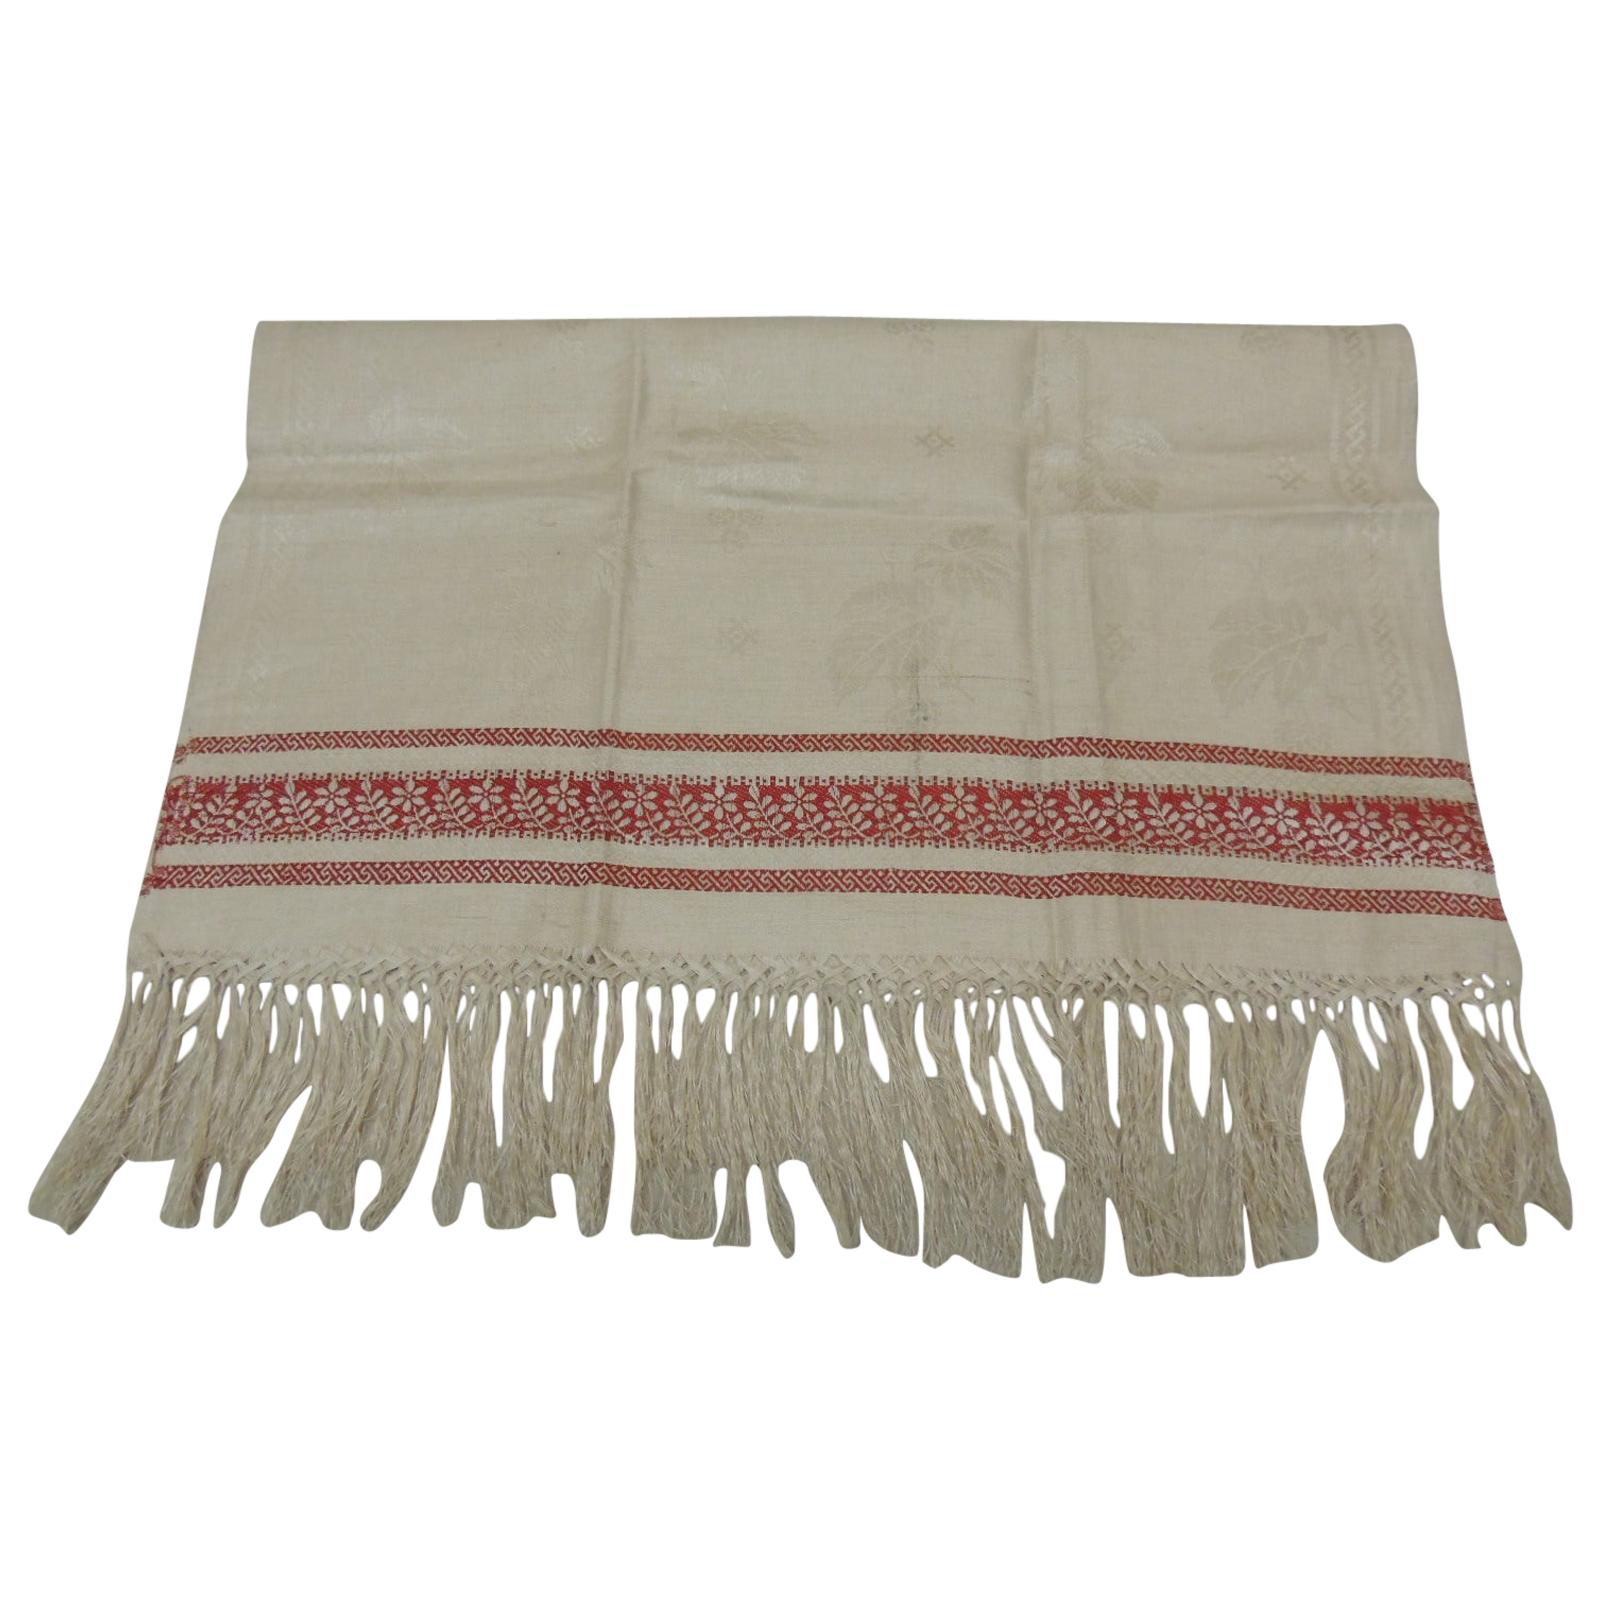 Vintage Red and Natural Woven Turkish Silk Damask Style Towel